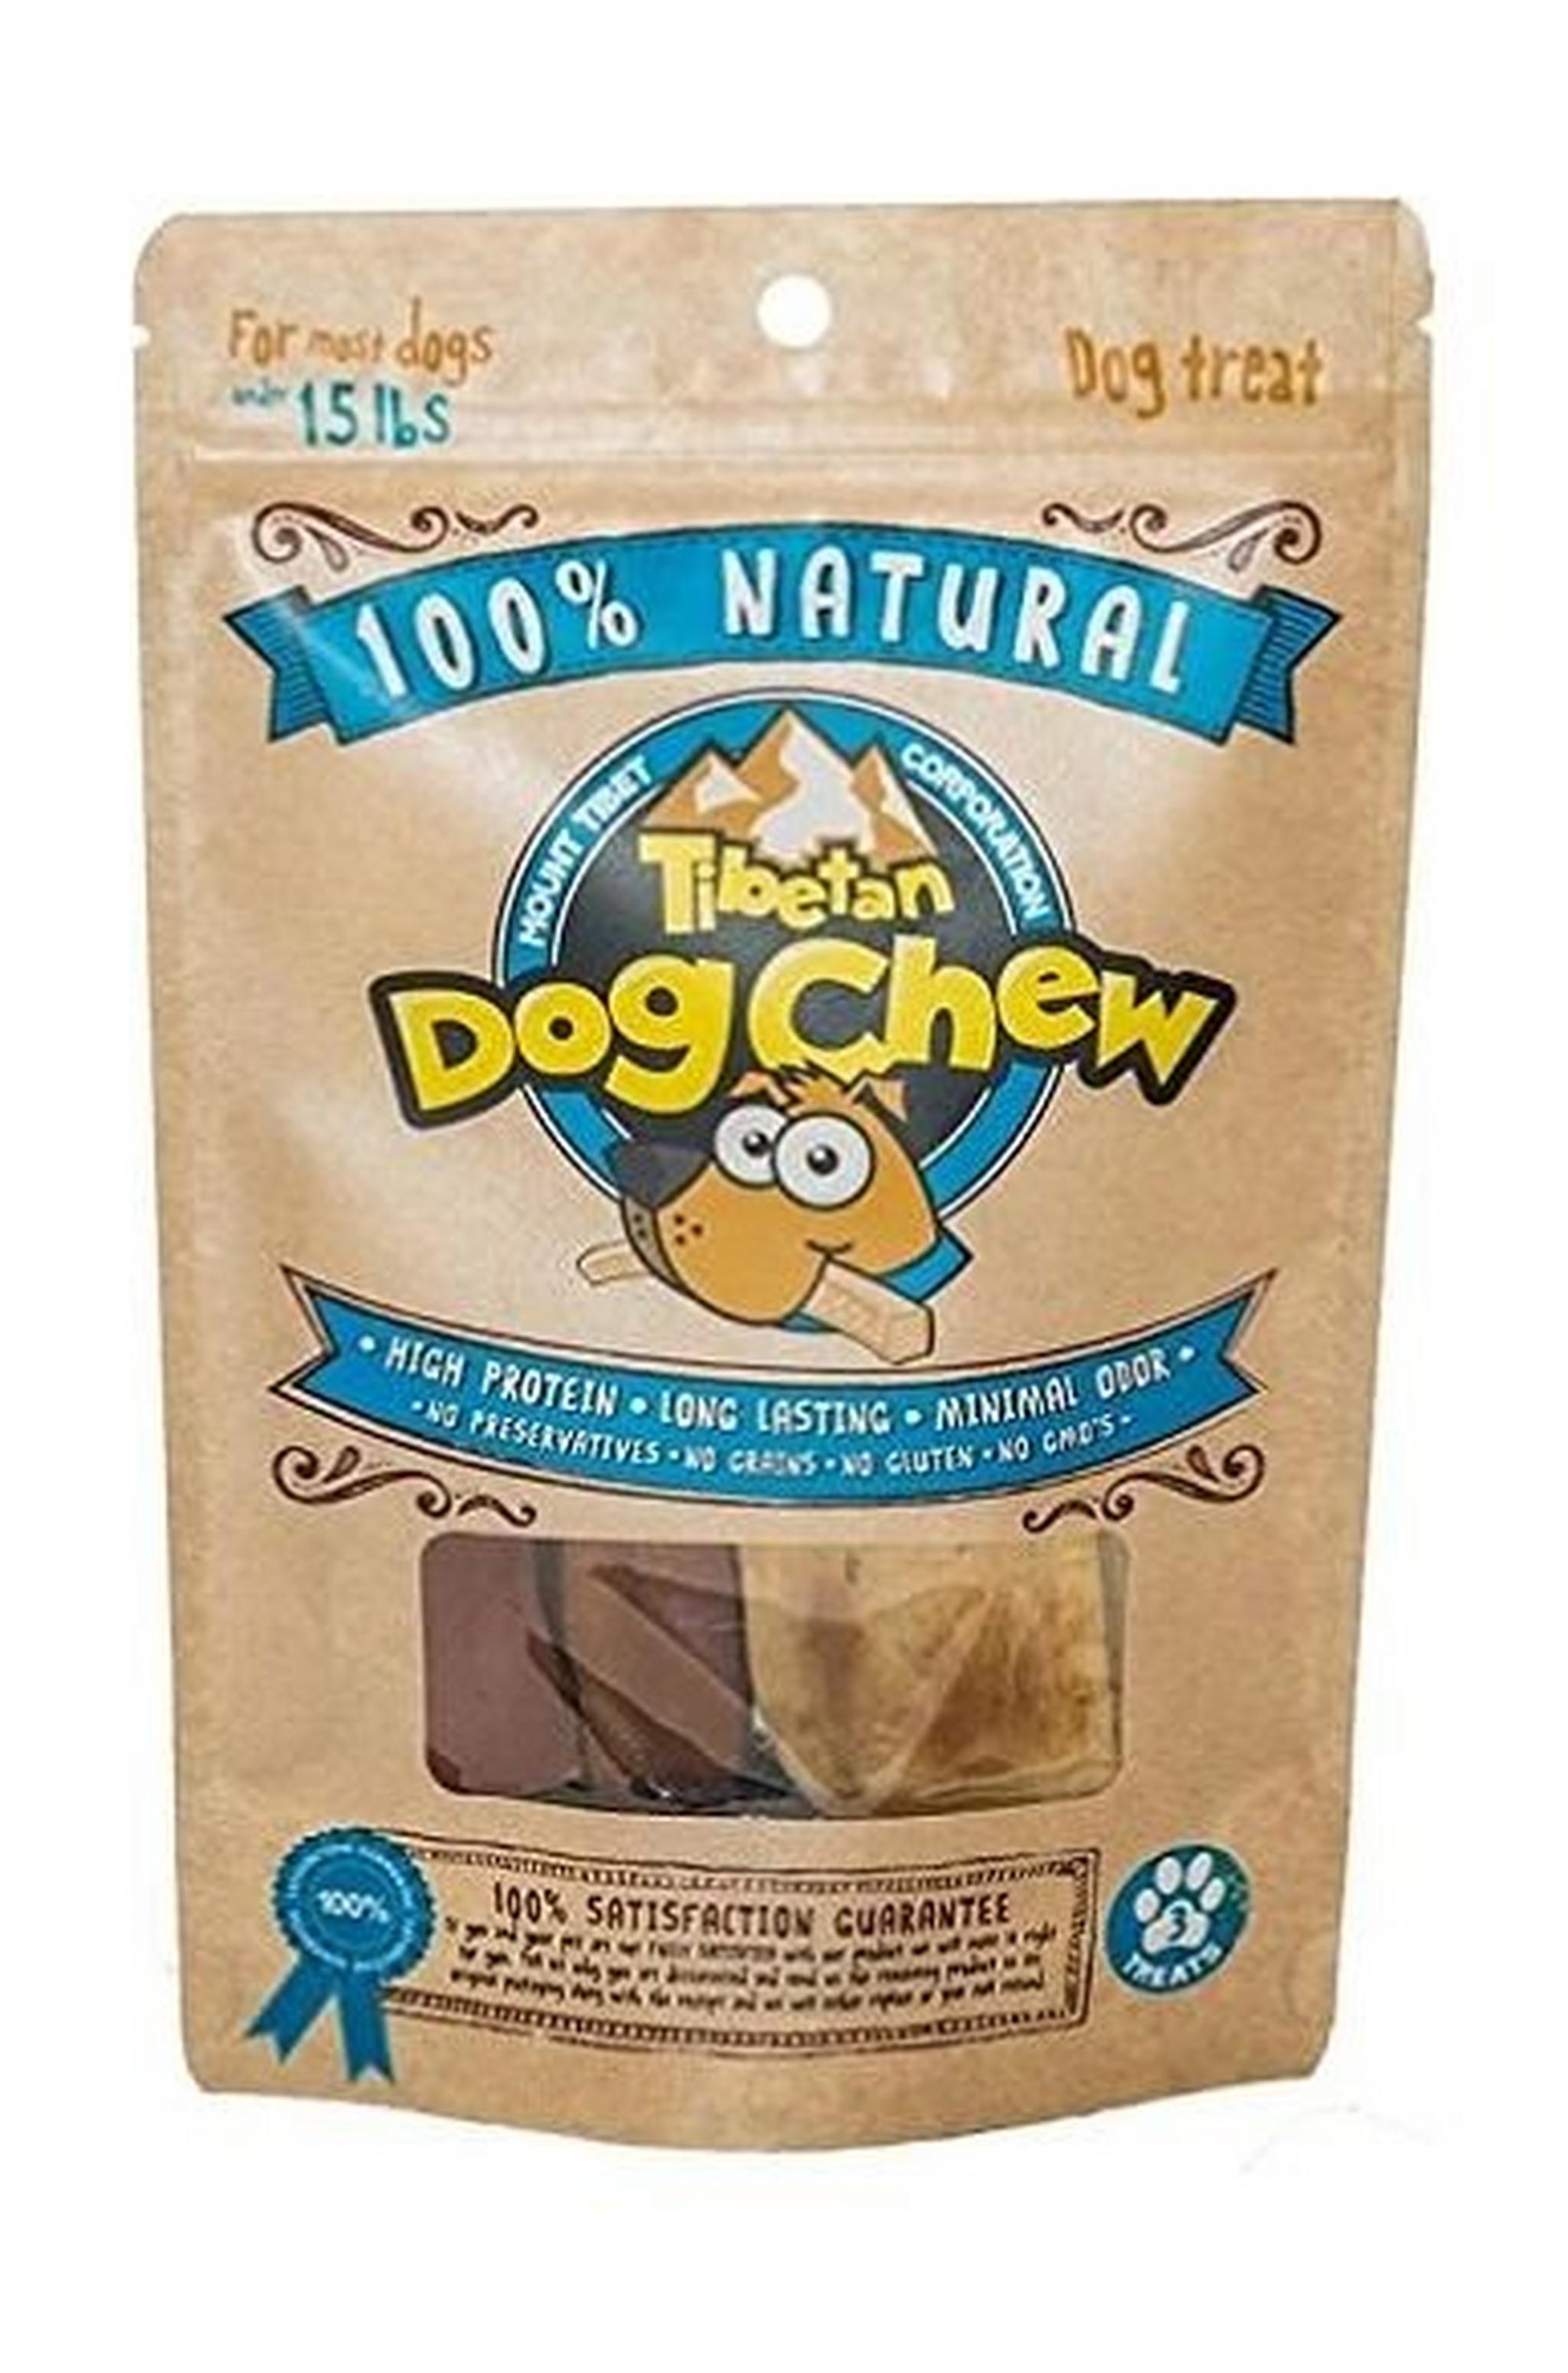 Tibetan Dog Chew Small For Dogs Under 15 lbs